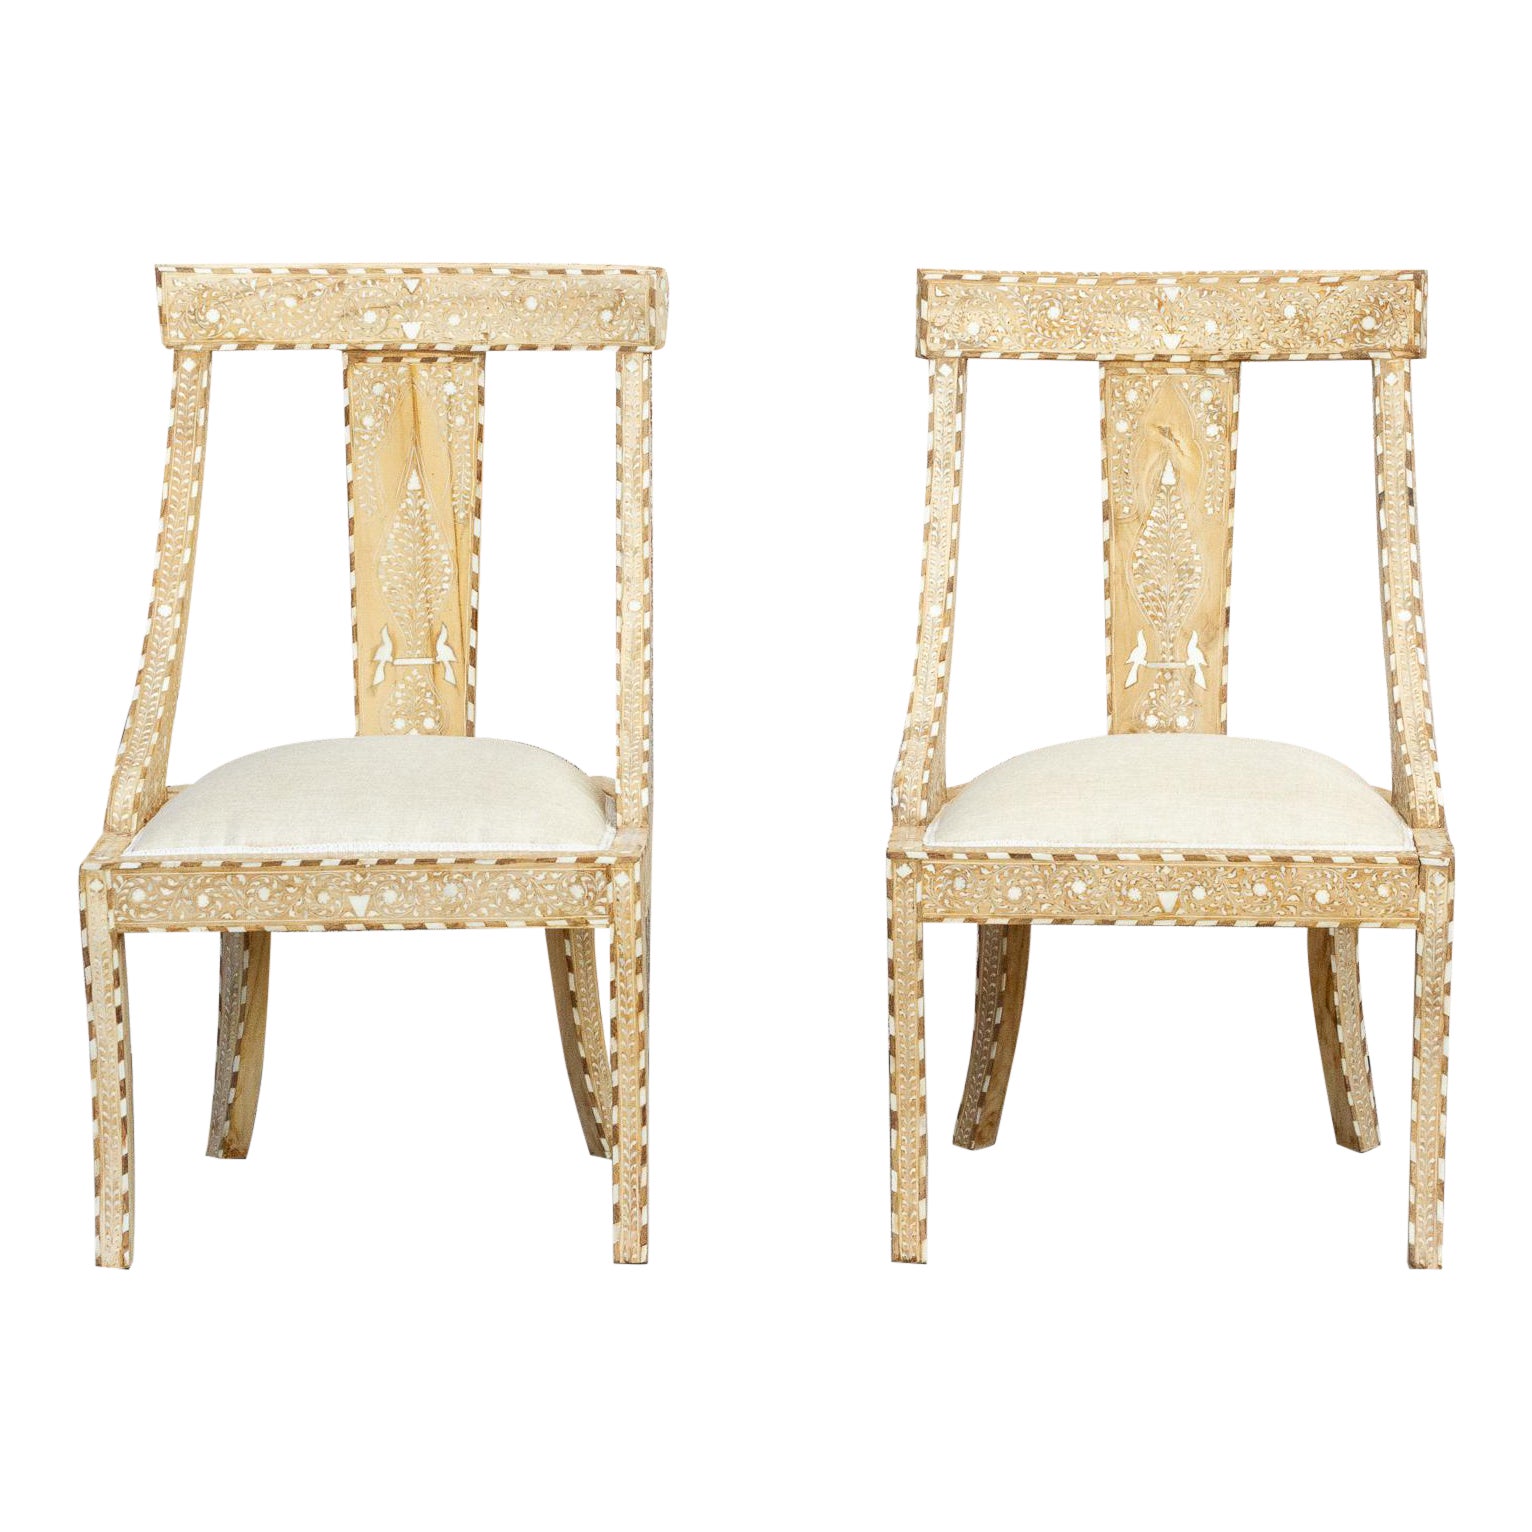 Pair of Dutch Colonial Inlay Chairs~P77632116